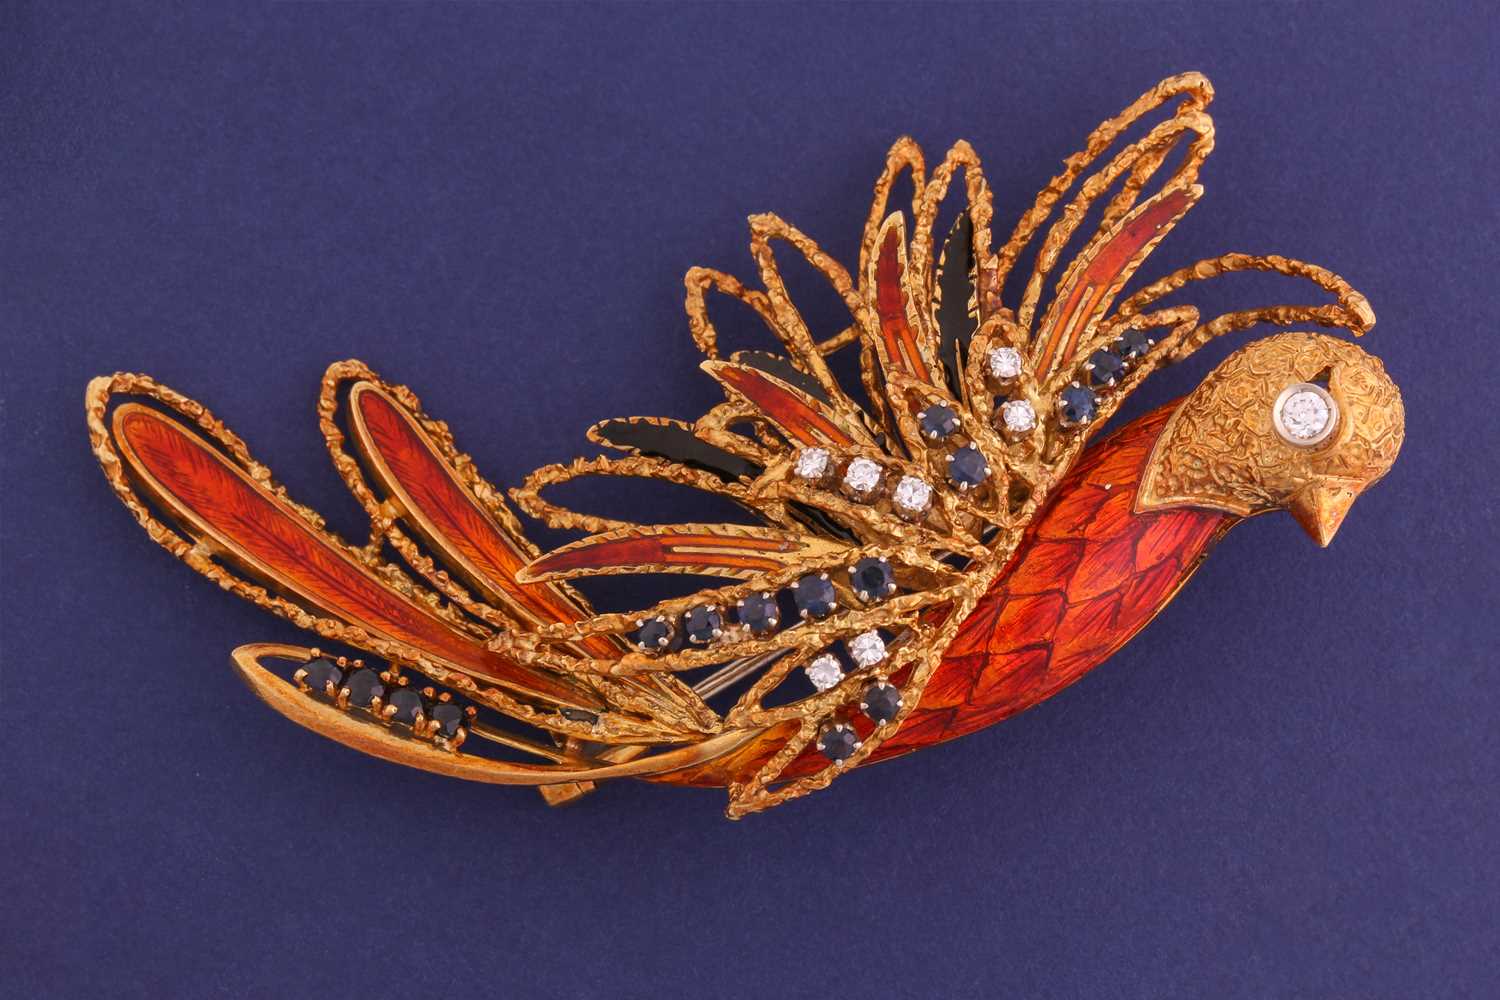 A sapphire and diamond phoenix brooch set in textured yellow metal with translucent orange enamel - Image 4 of 4